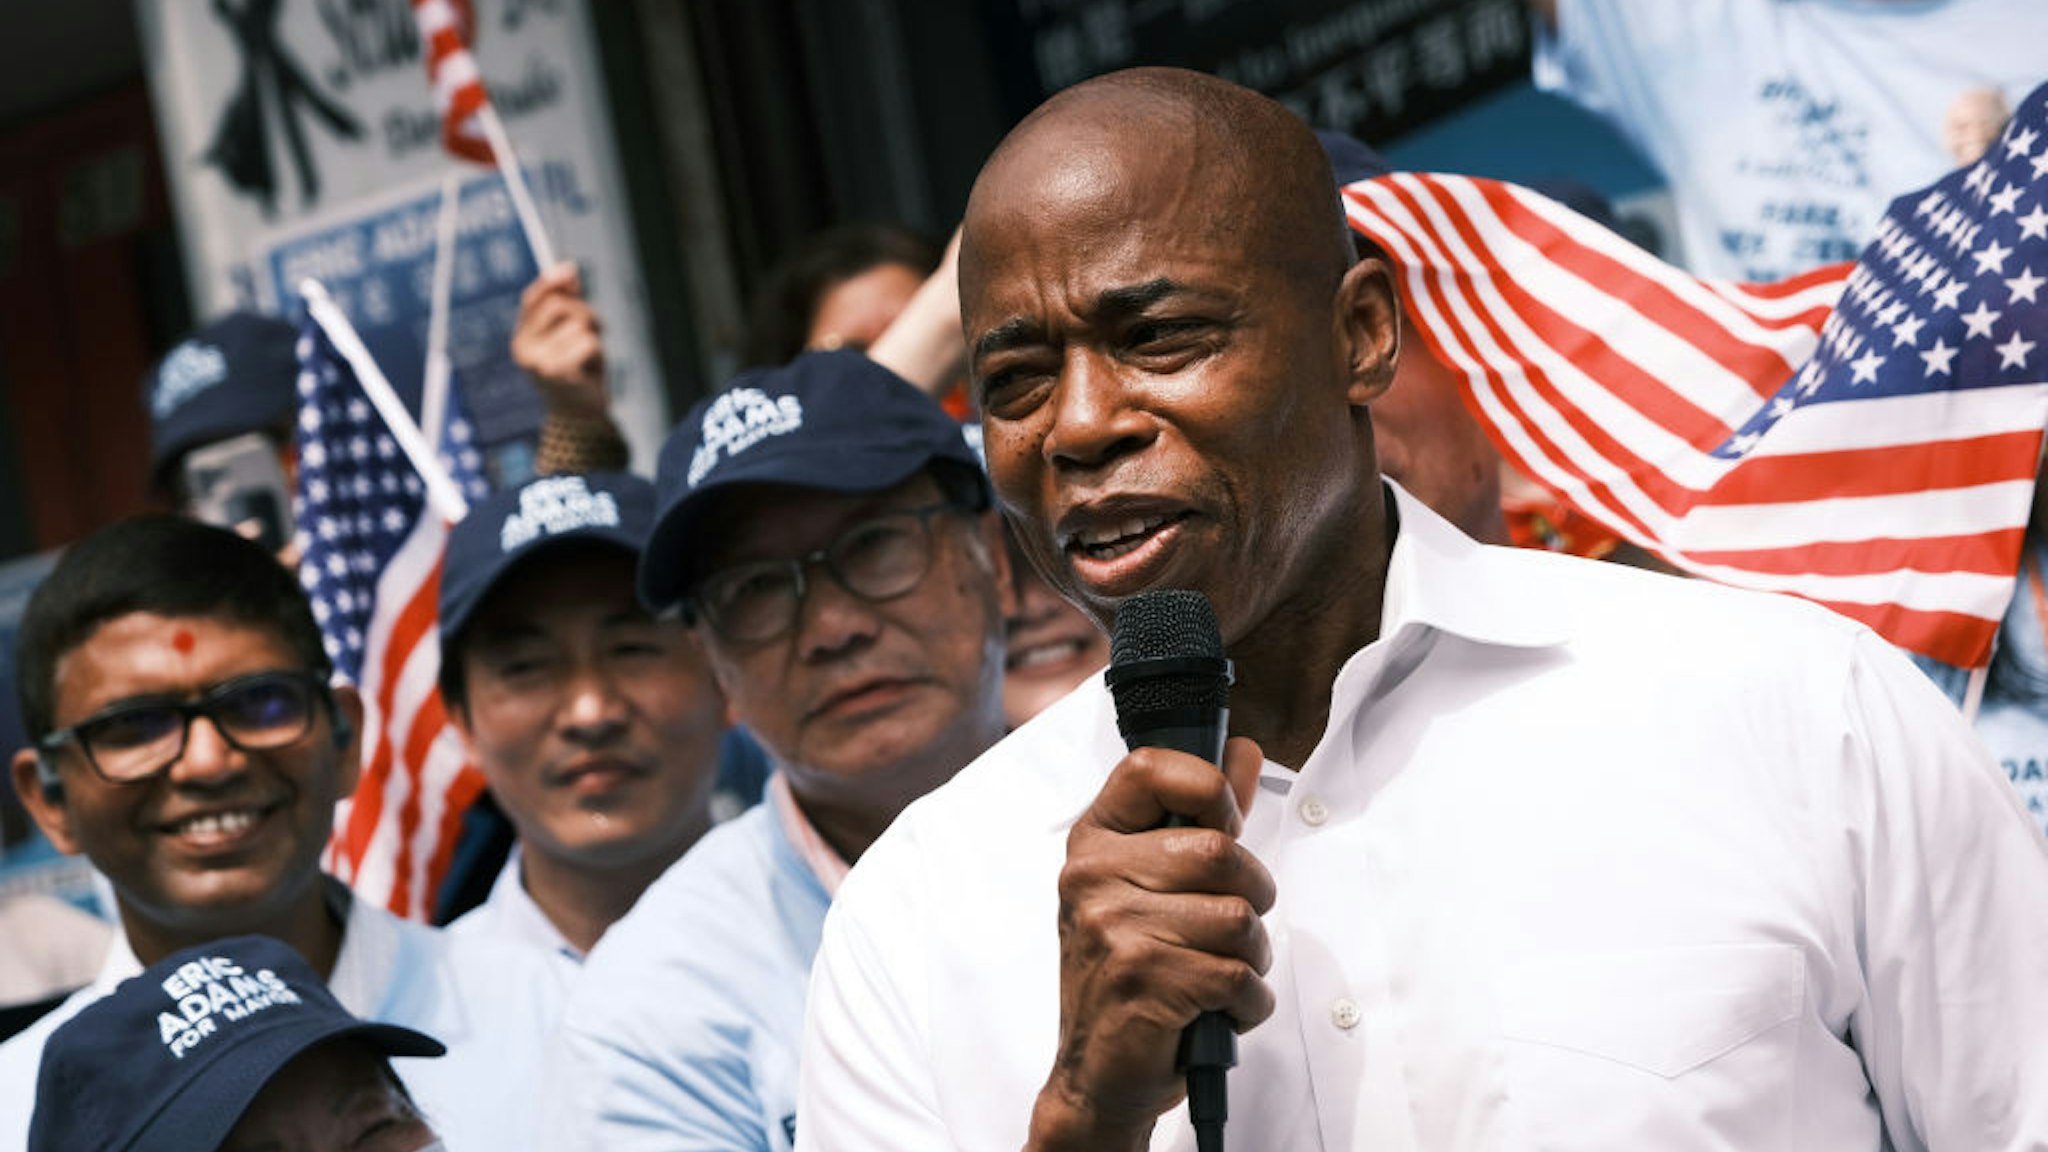 Brooklyn Borough President Eric Adams, who's running as a Democratic mayoral candidate, appears in Flushing, Queens to open a new campaign office on June 8, 2021 in the Queens borough of New York City.